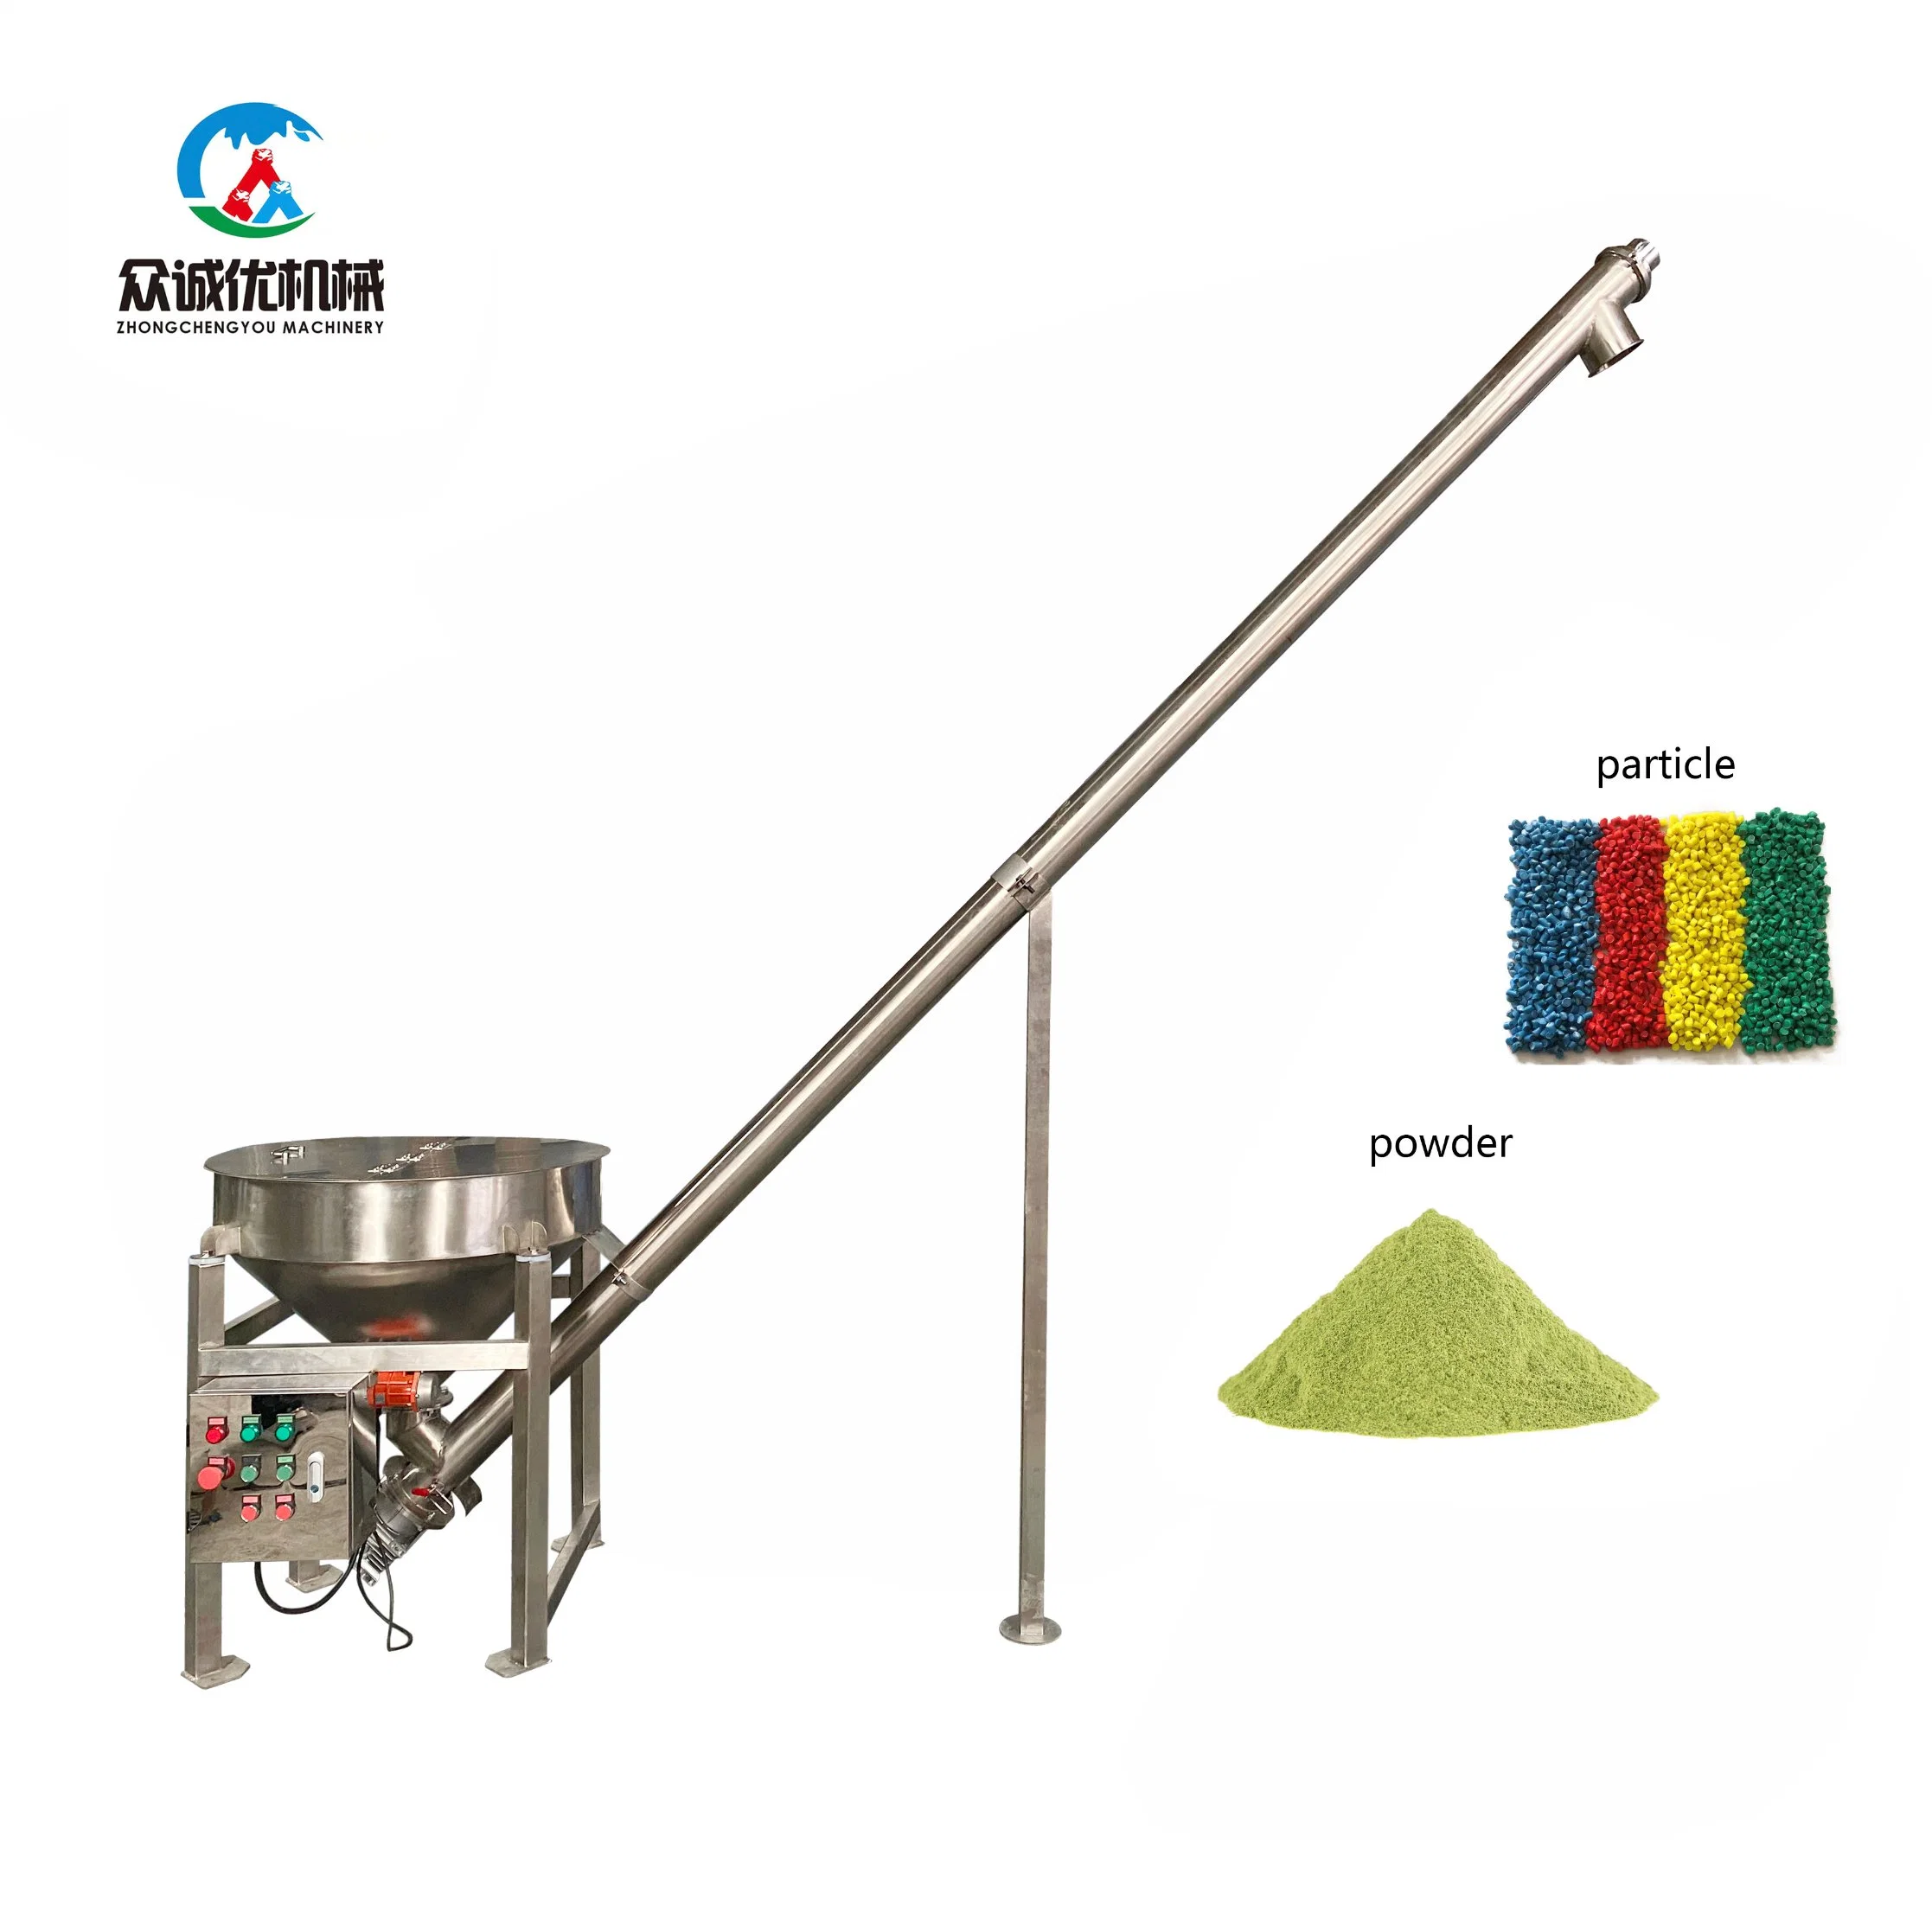 Stainless Steel Screw Feeder Conveyor for Granules and Powder